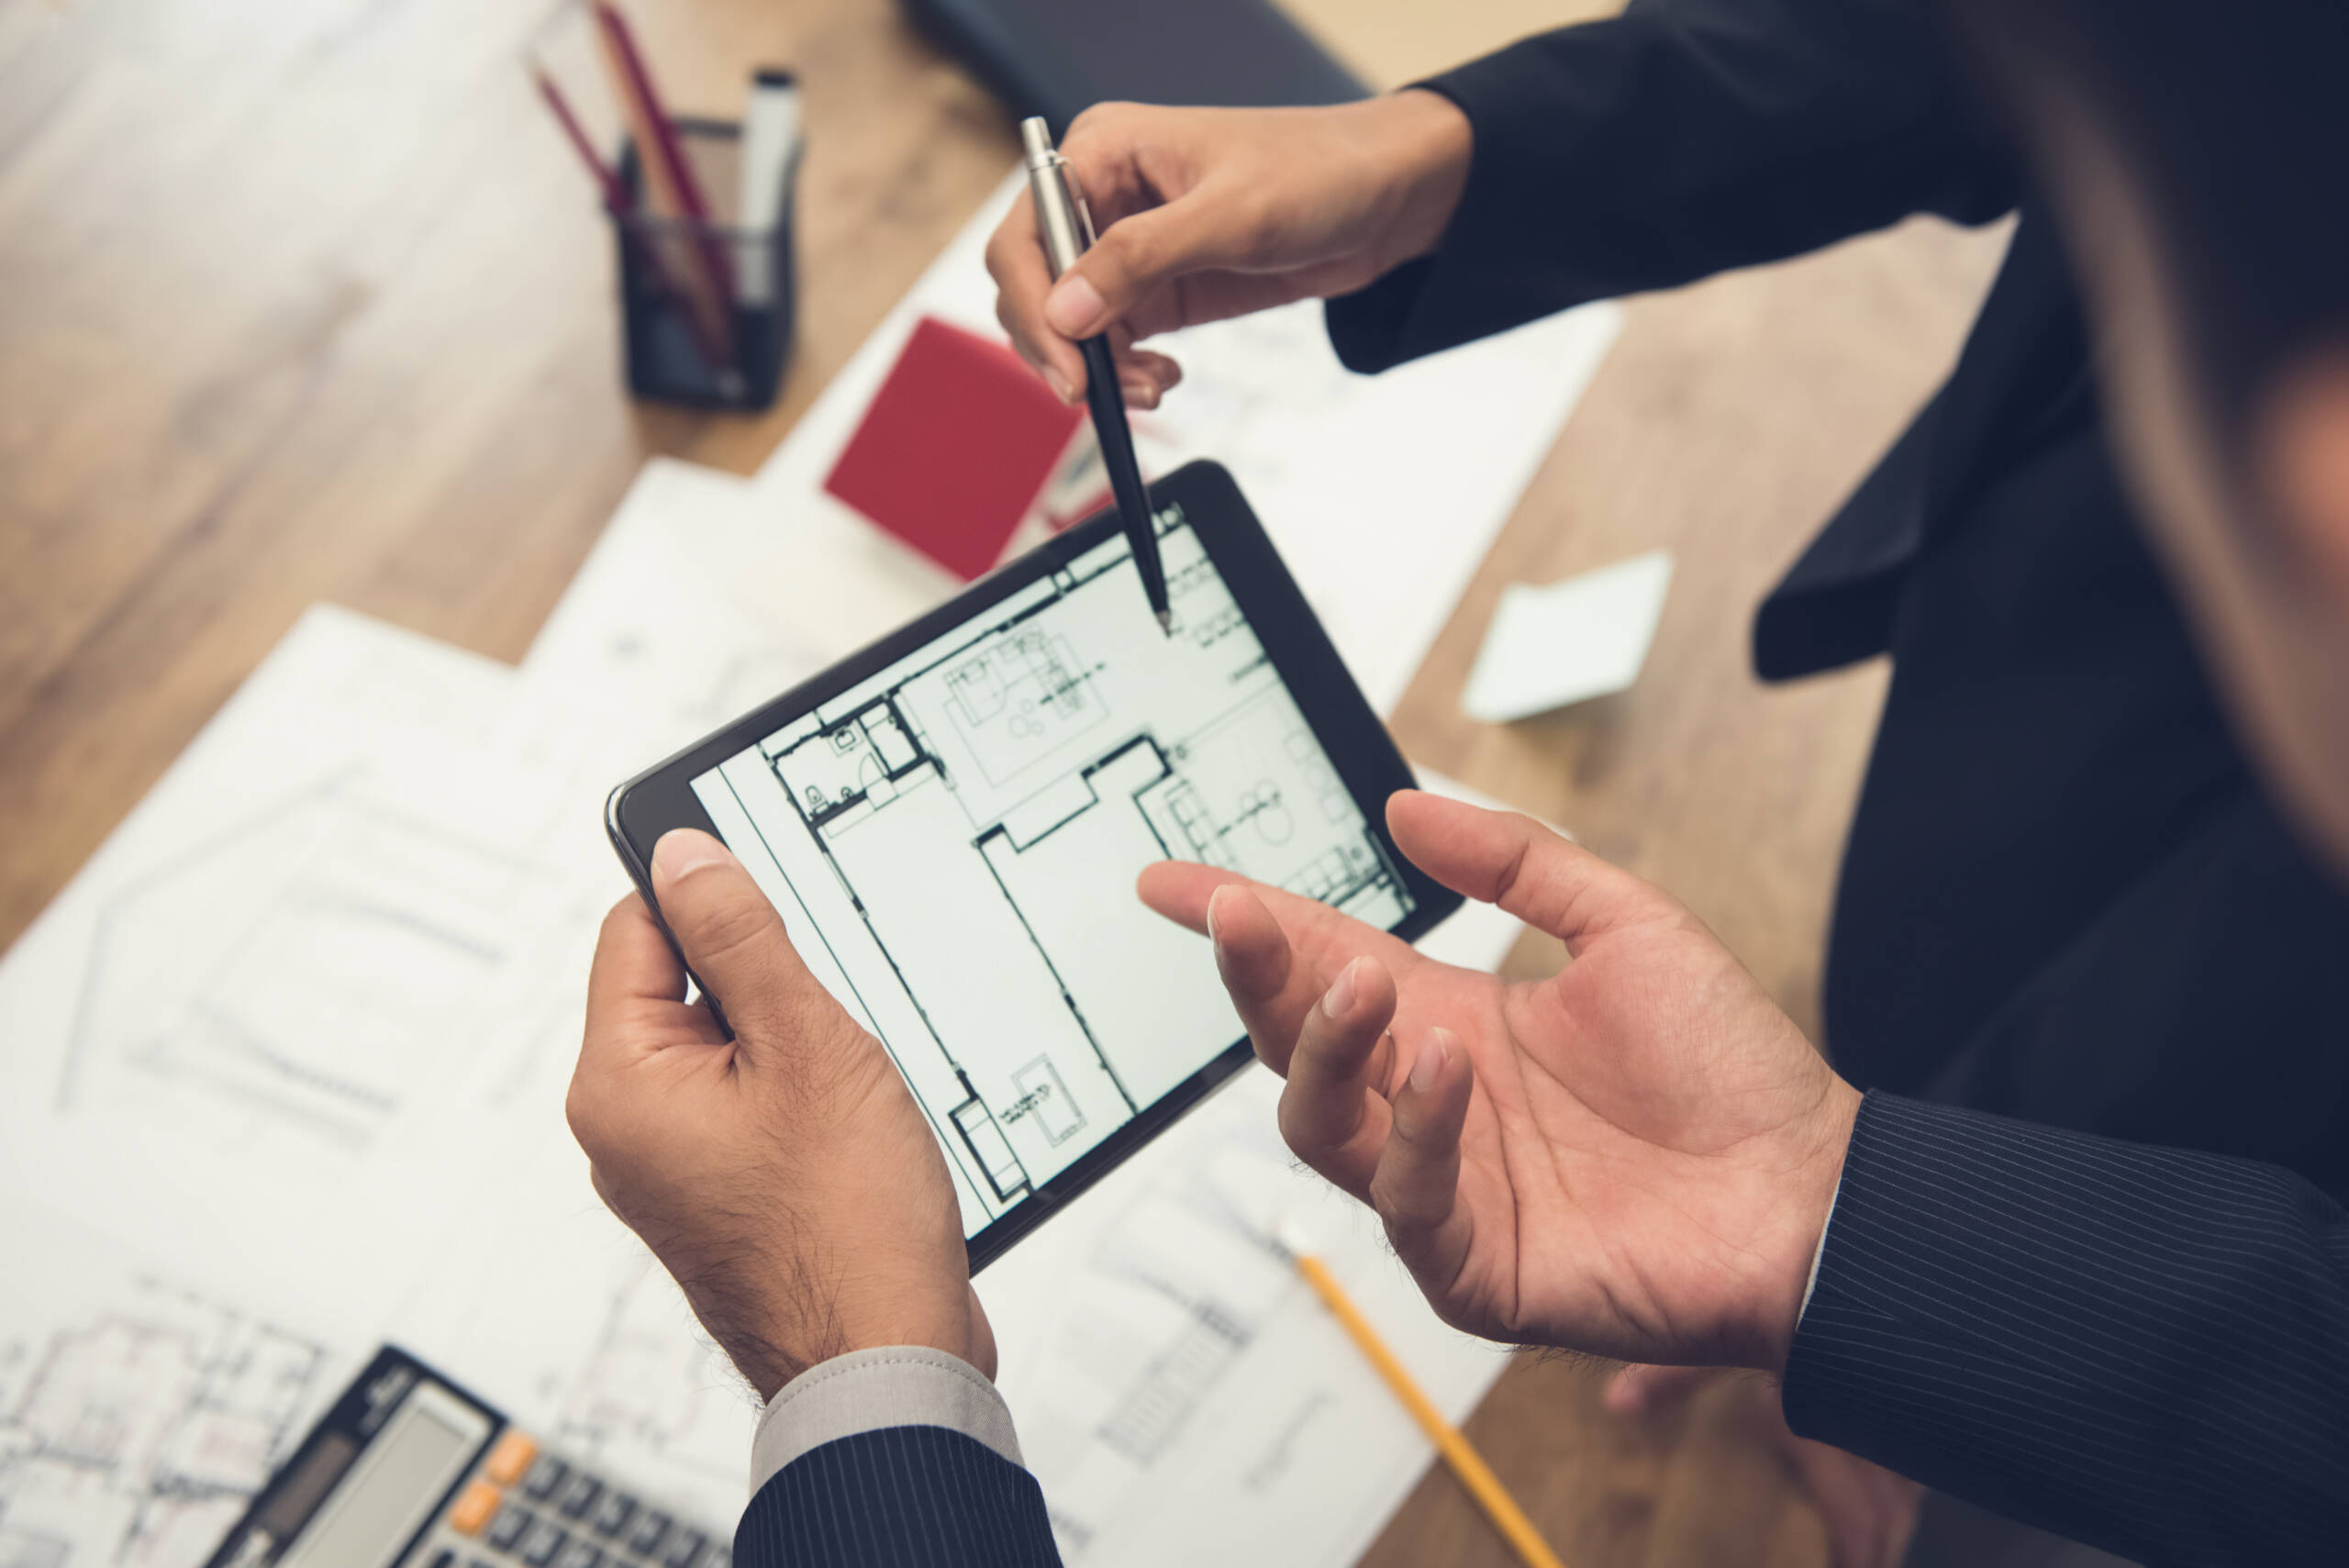 Two mortgage brokers look over a new builds plans on a tablet